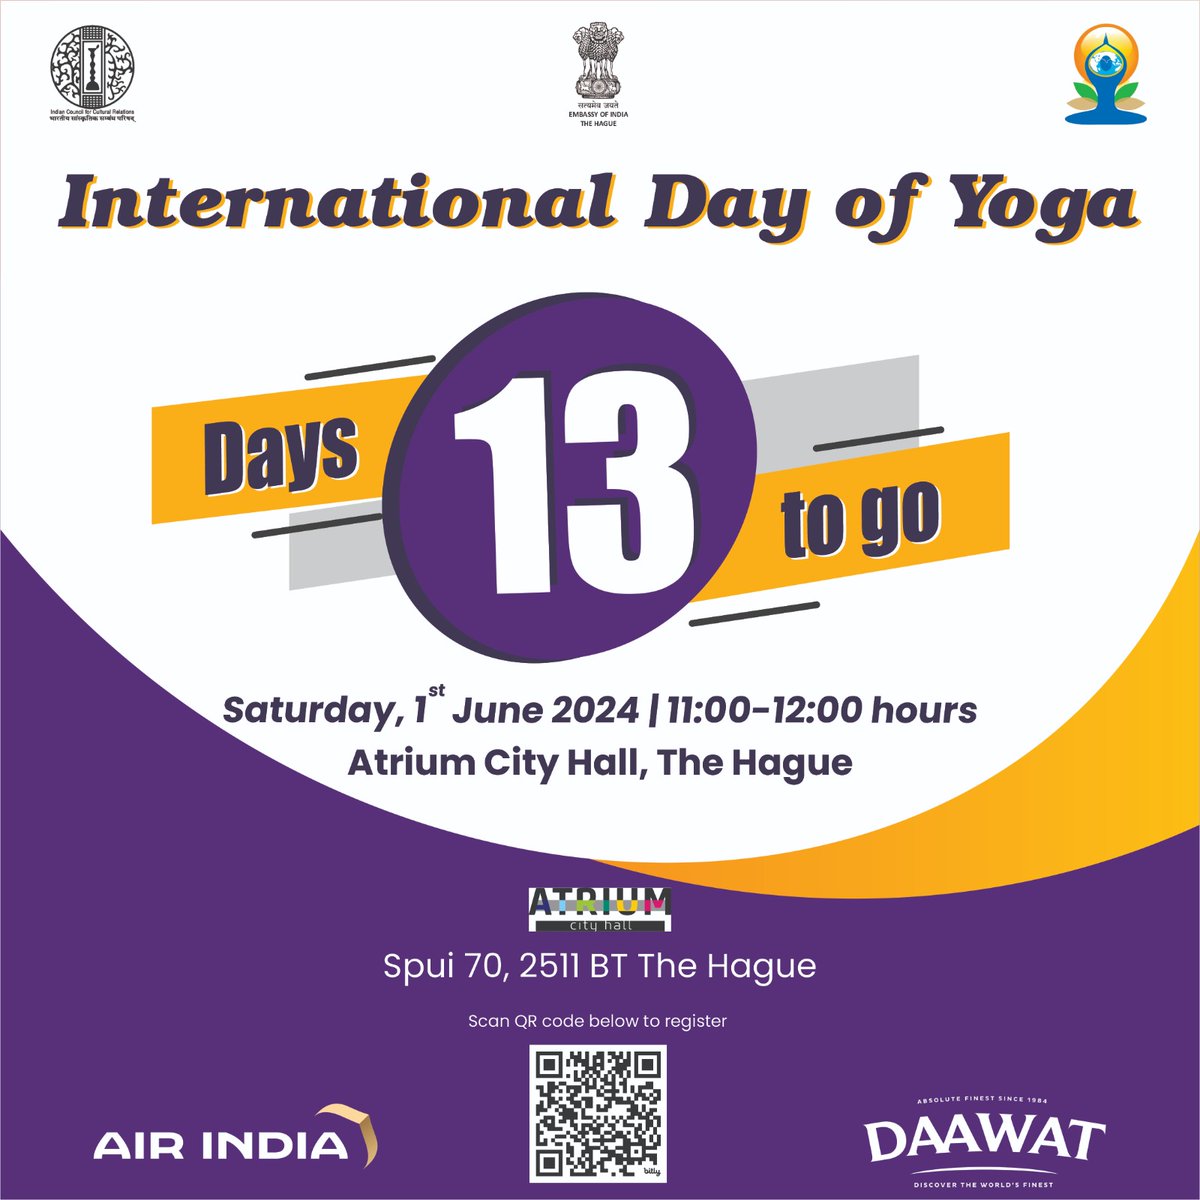 Hurry! Register @ bit.ly/4b7fWIY for the International Day of Yoga 🧘‍♂️event on 🗓️Saturday, 1st June I 1100 - 1200 hrs @AtriumCityHall #InternationalDayofYoga or scan QR code👇